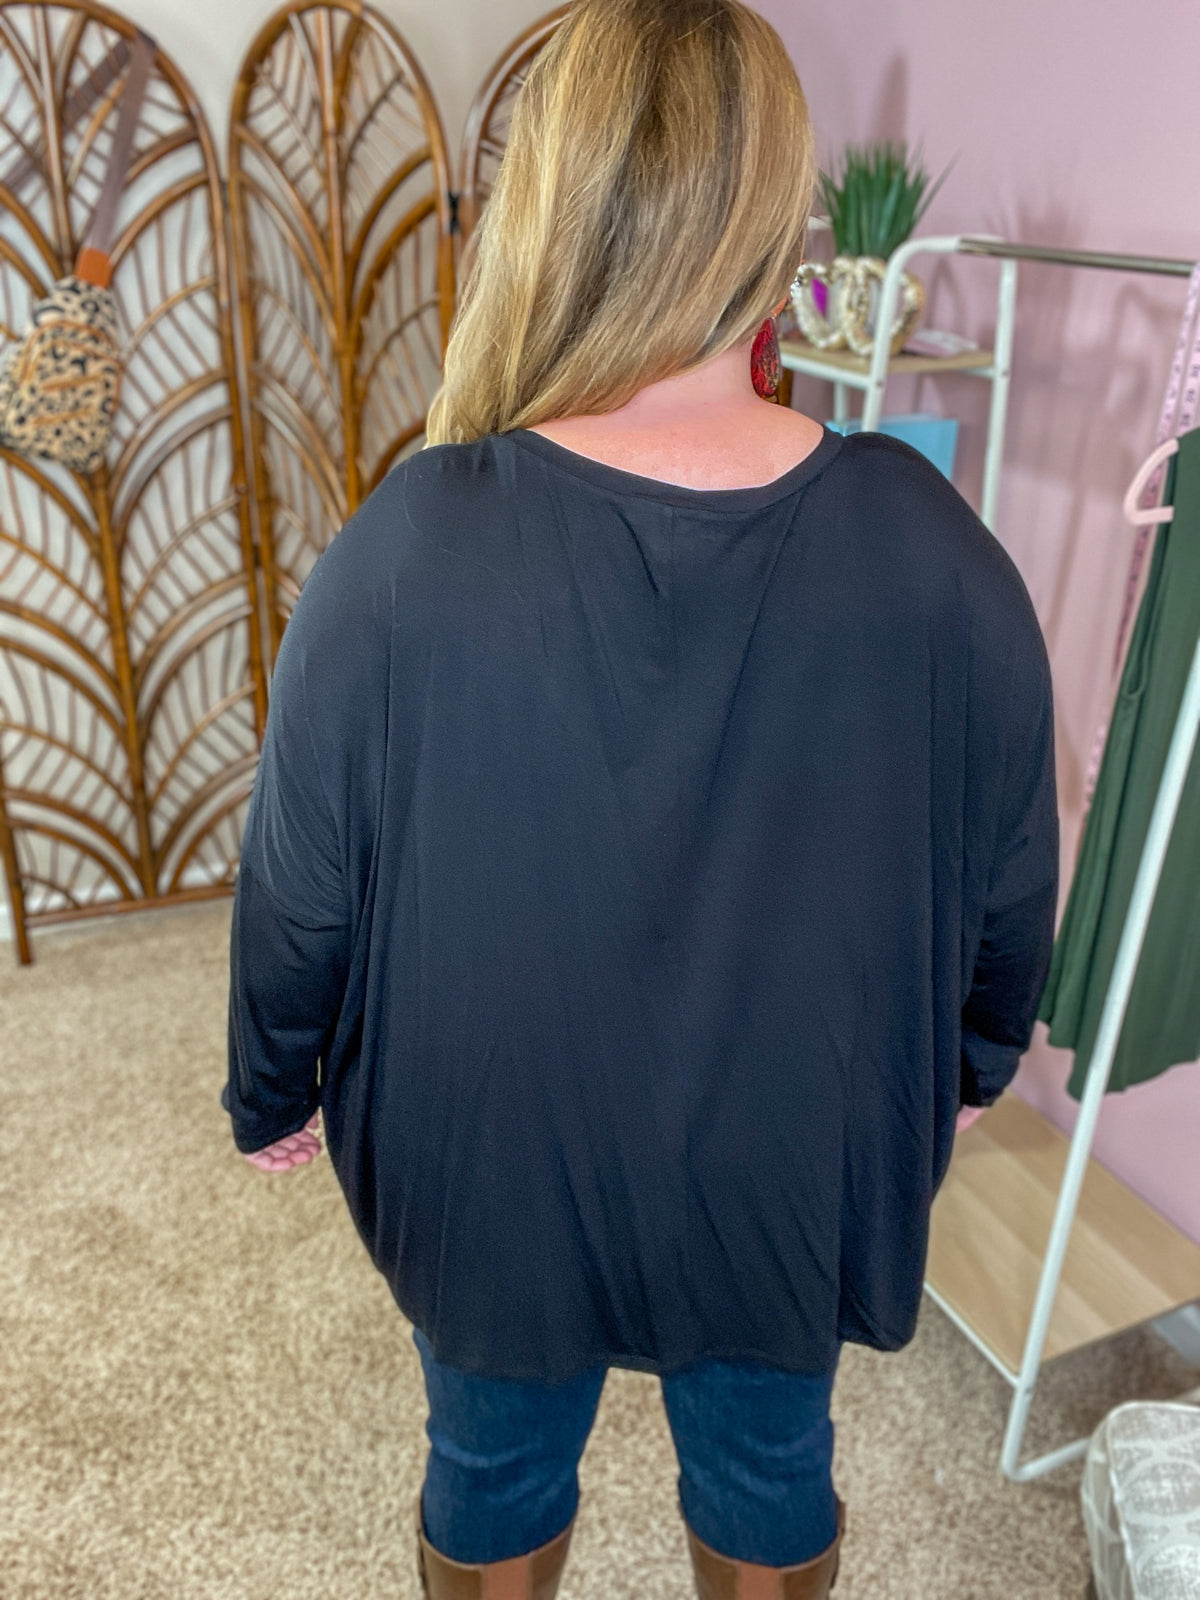 Comforts of Fall Slouchy Top - Black